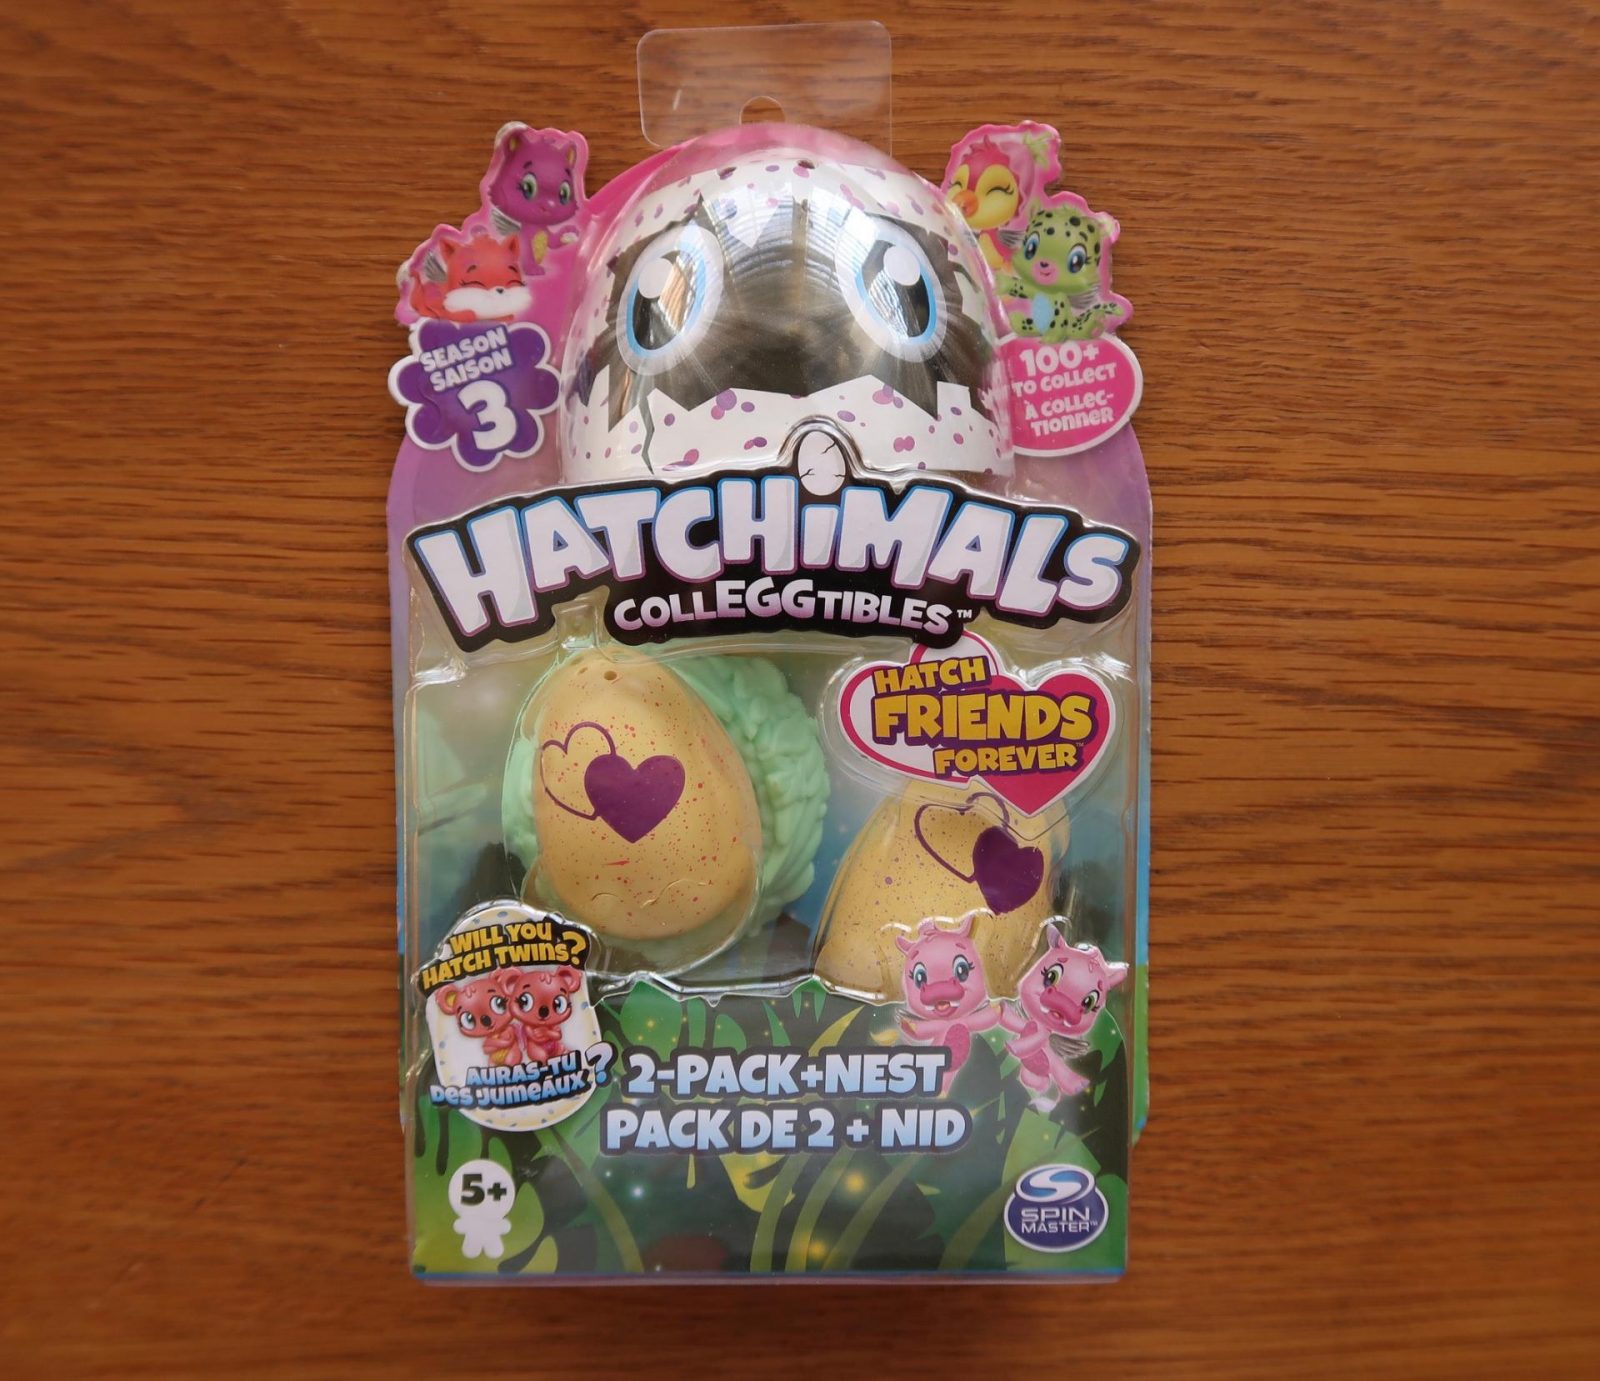 with Shell Select your favourite Hatchimals CollEggtibles Season 3 